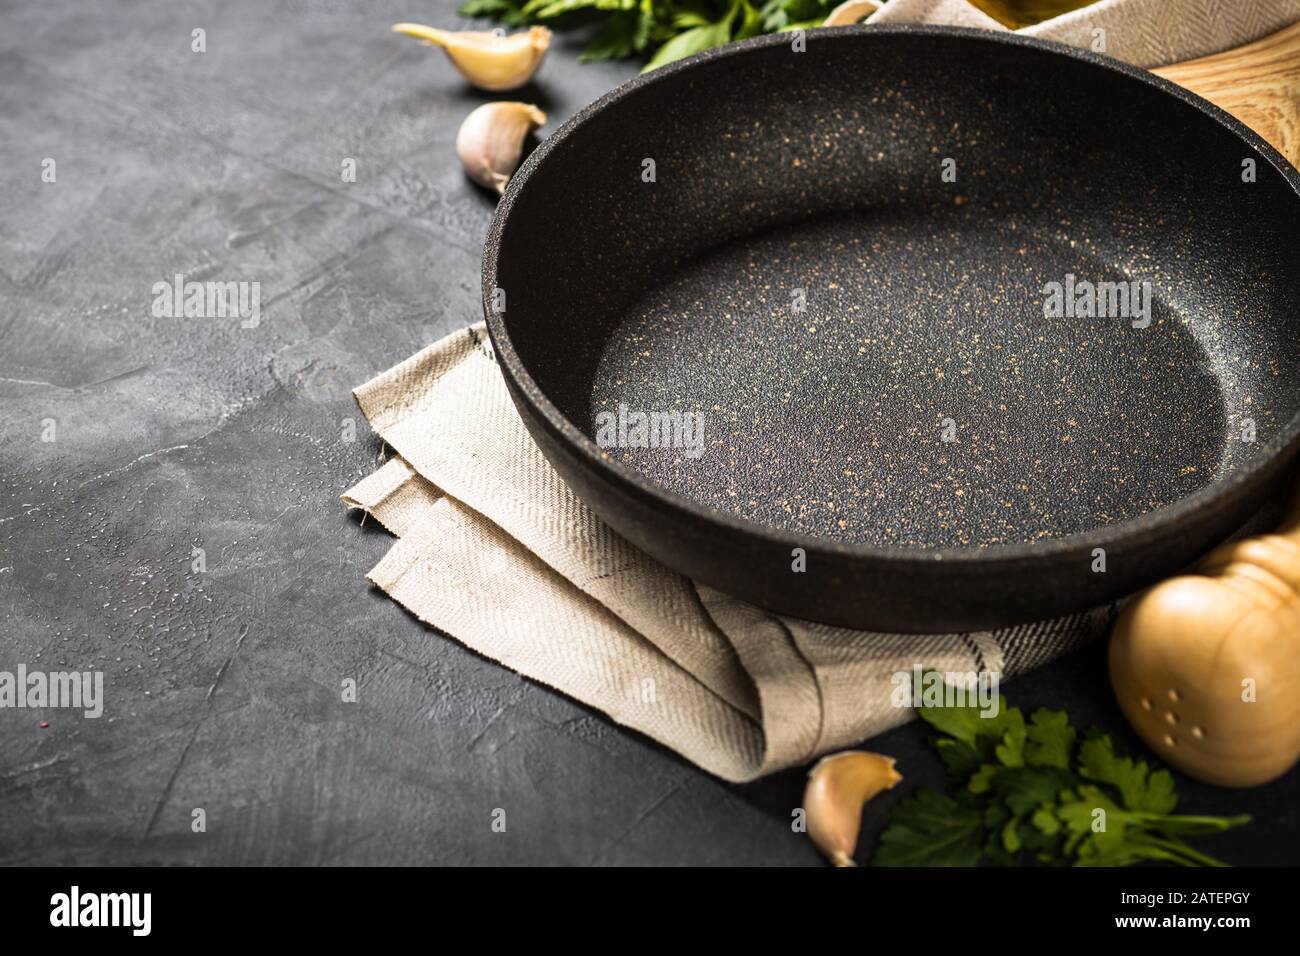 Food cooking background on black table. Stock Photo